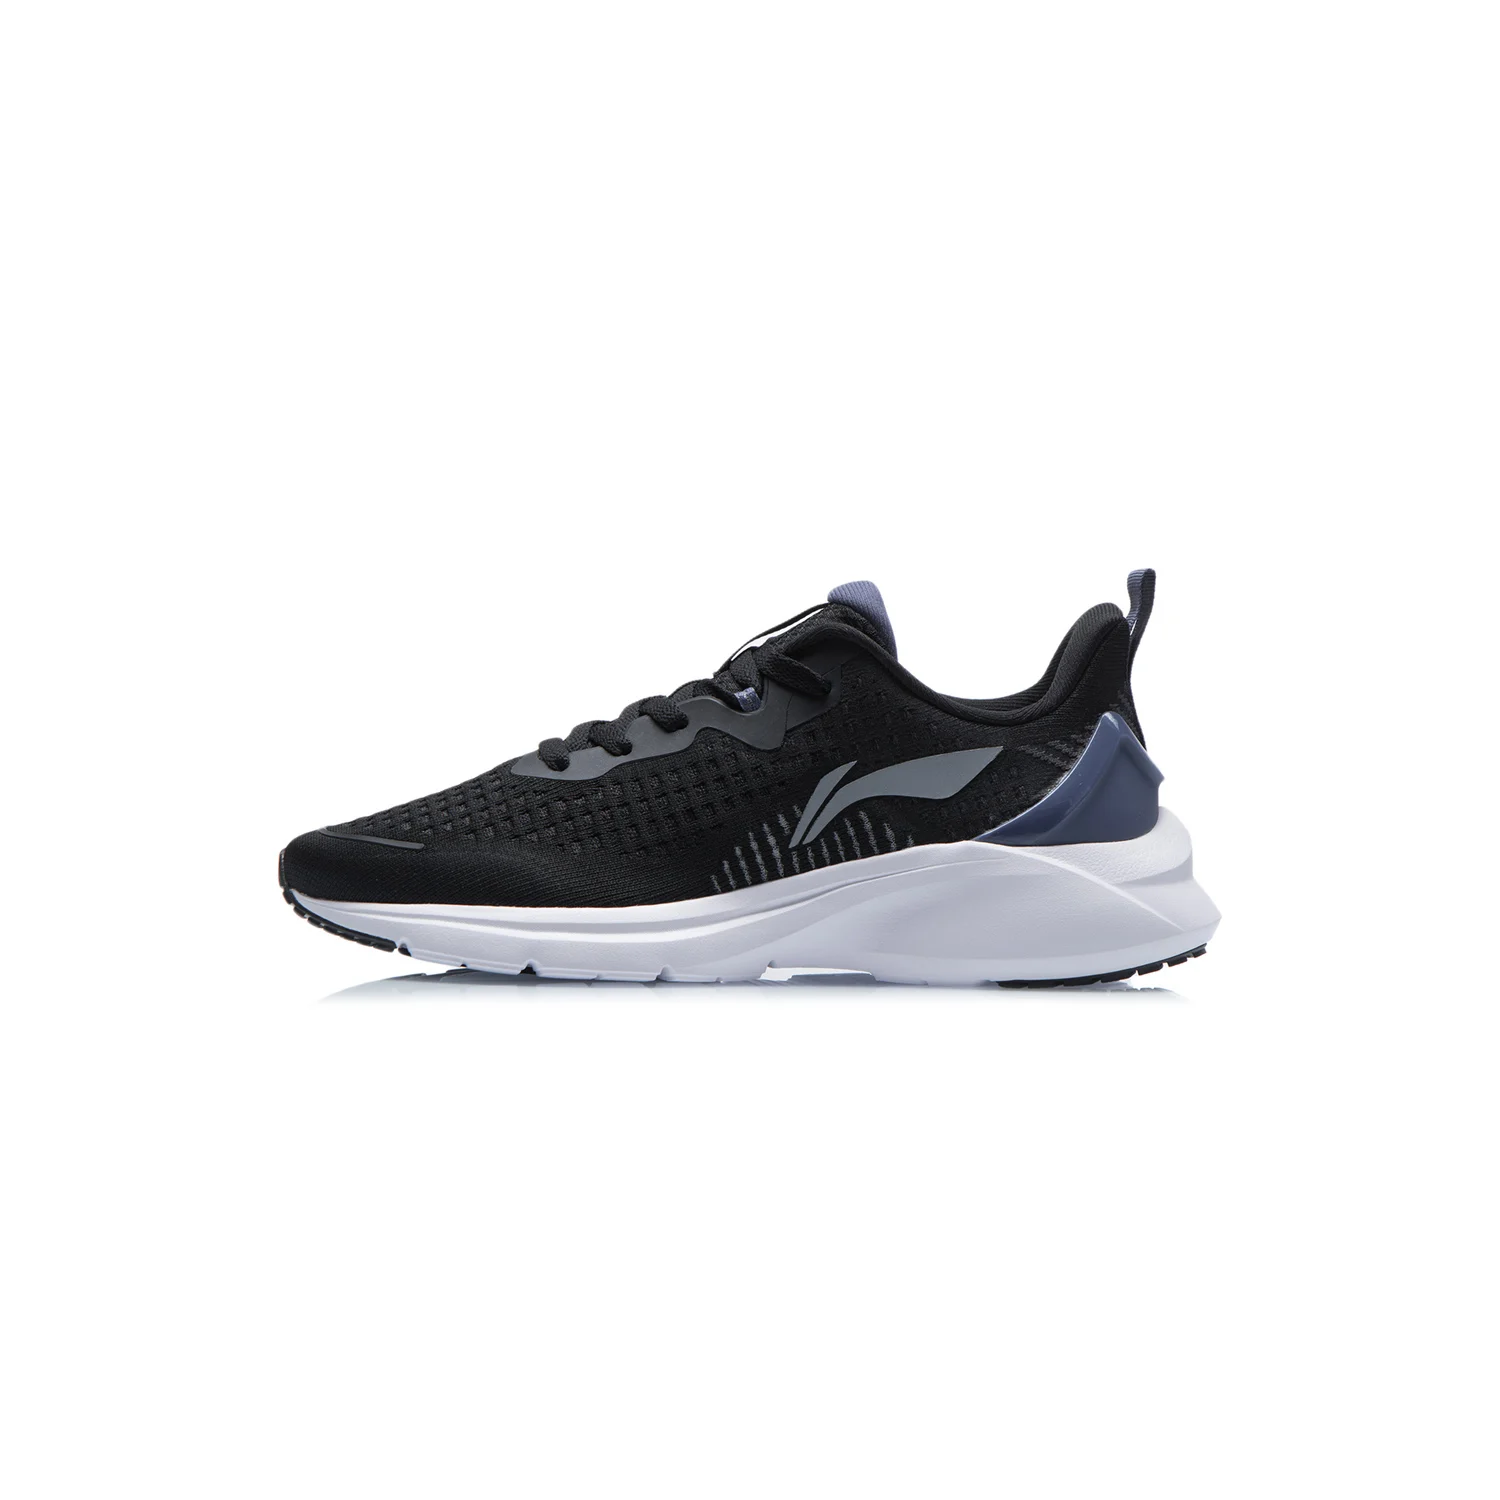 Lining Running shoes men's 2021 new casual shoes autumn winter men's shoes light shoes running shoes